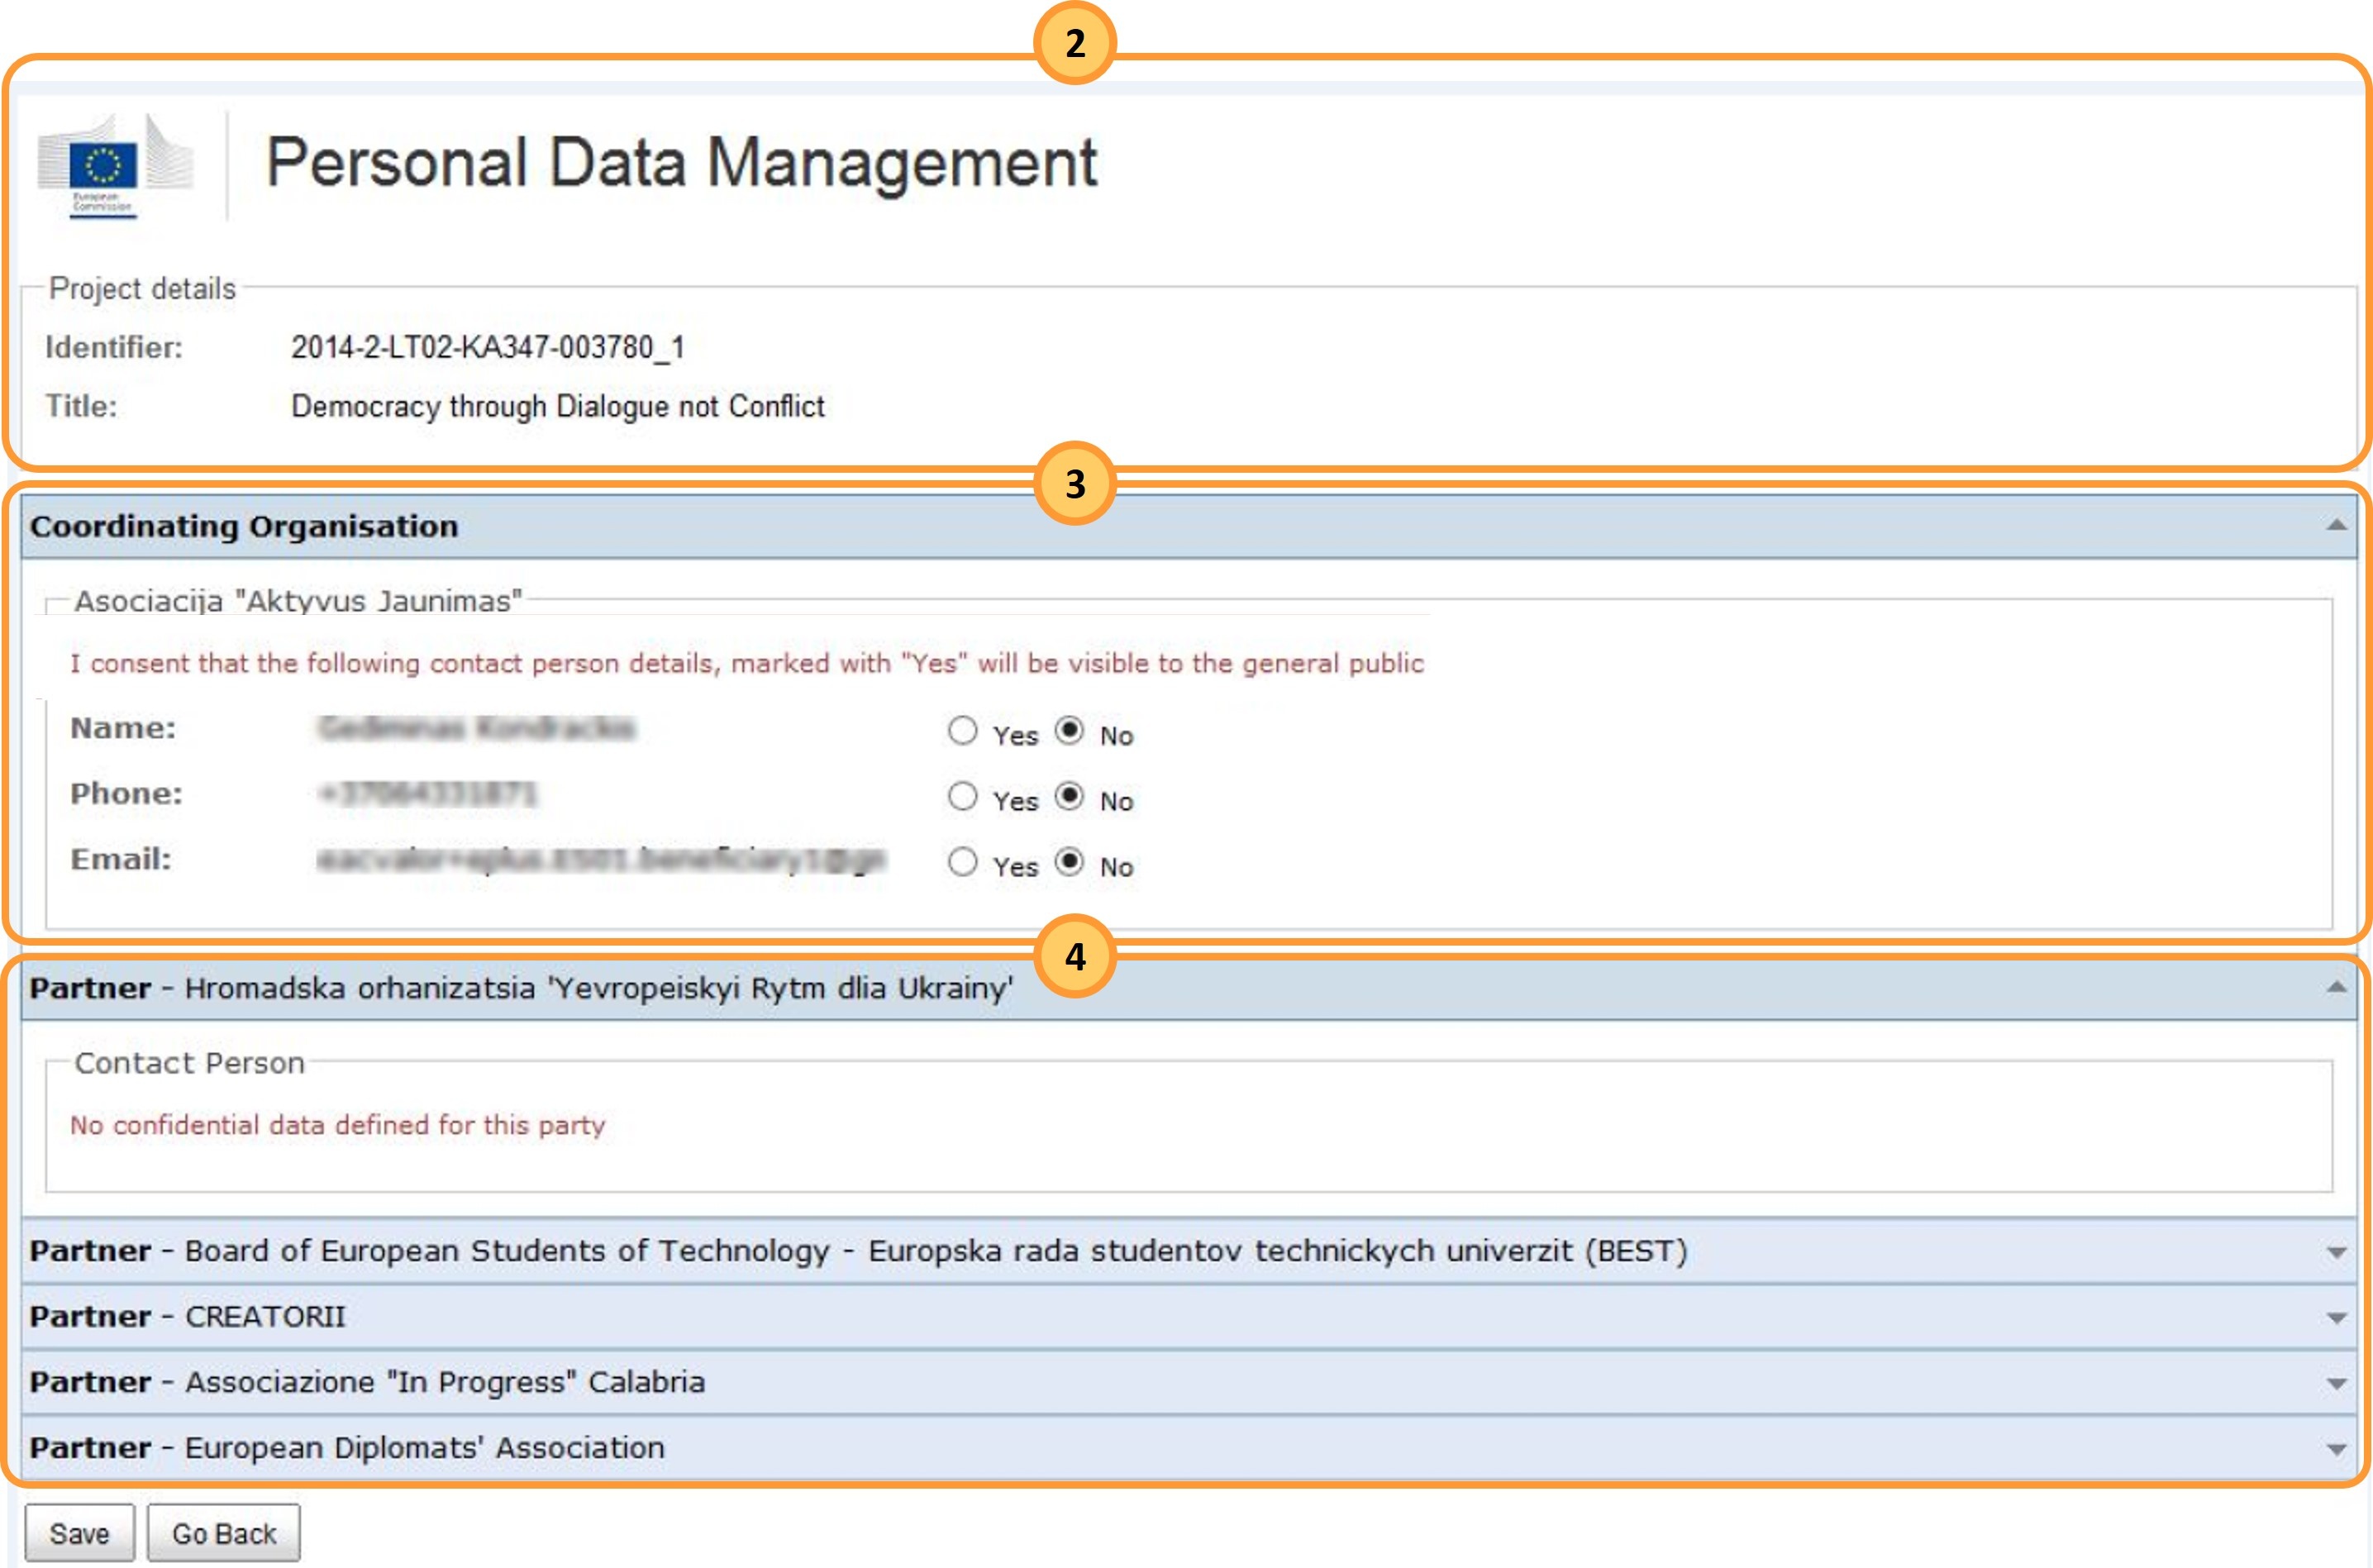 Personal Data Management section